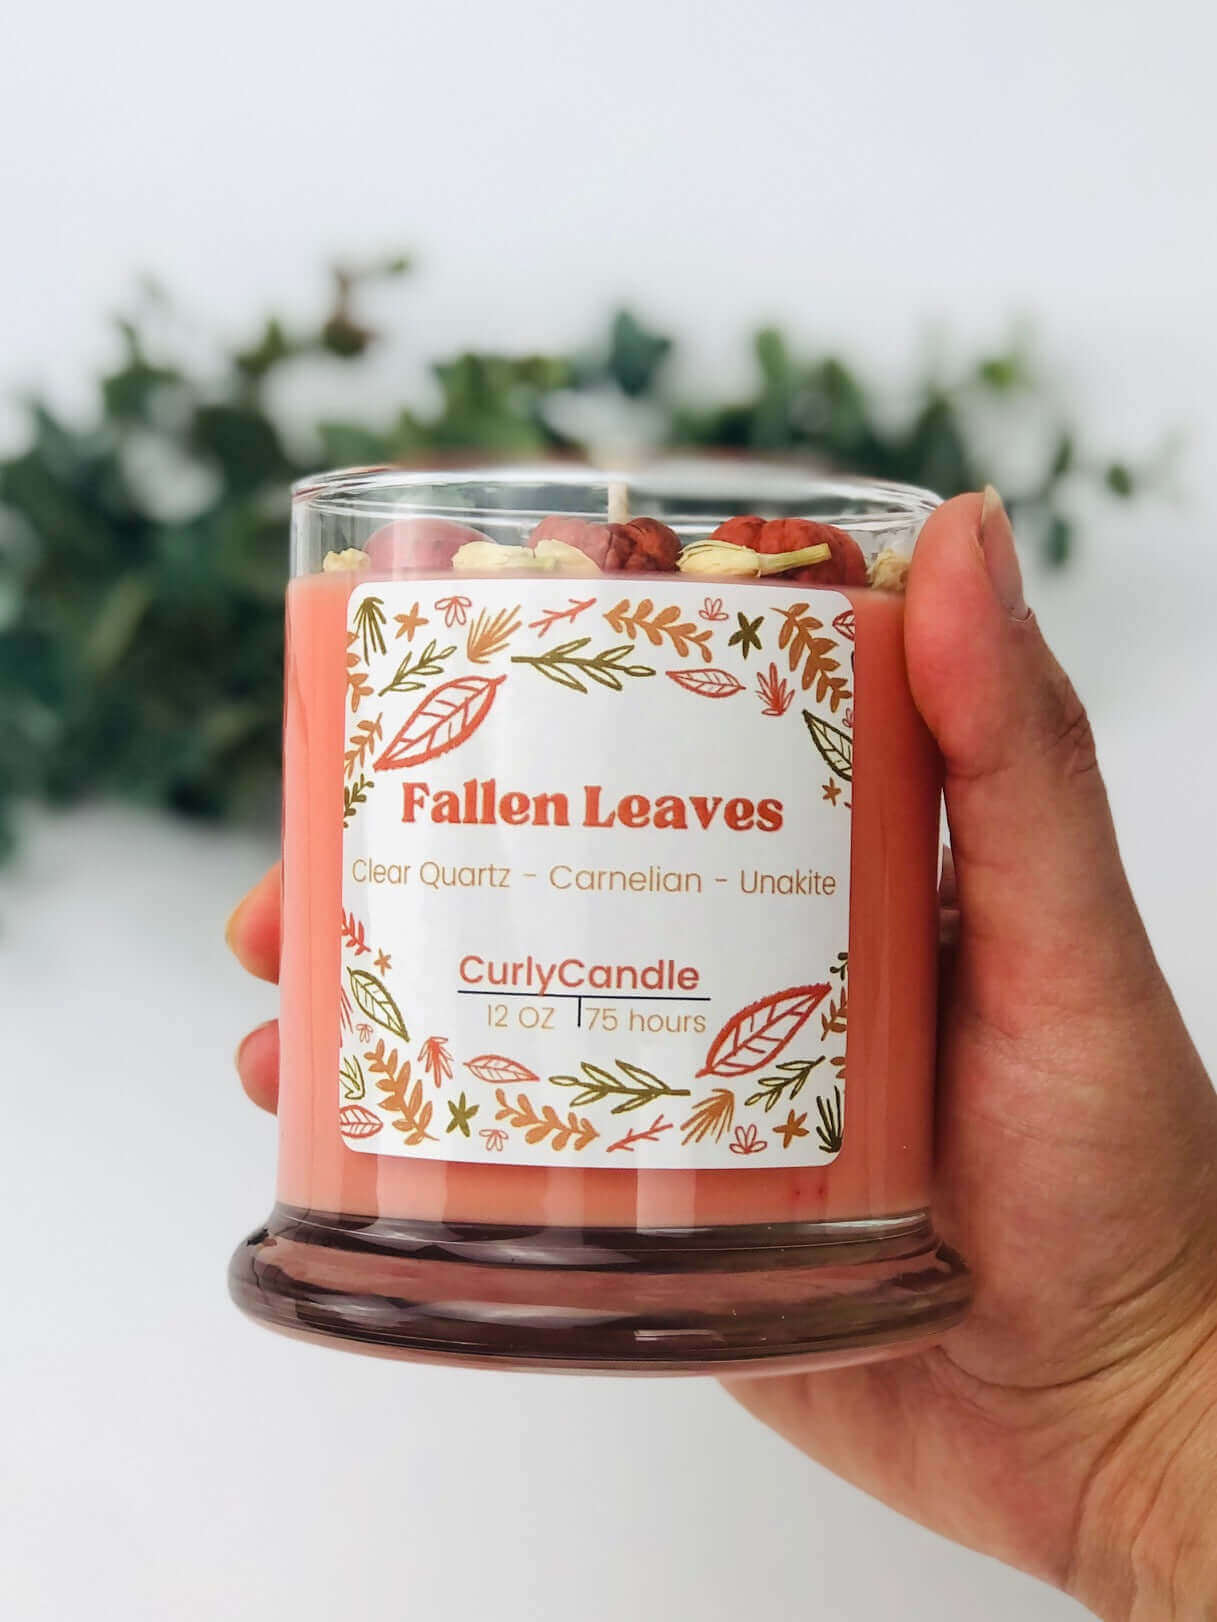 Fallen Leaves Crystal Infused Candle